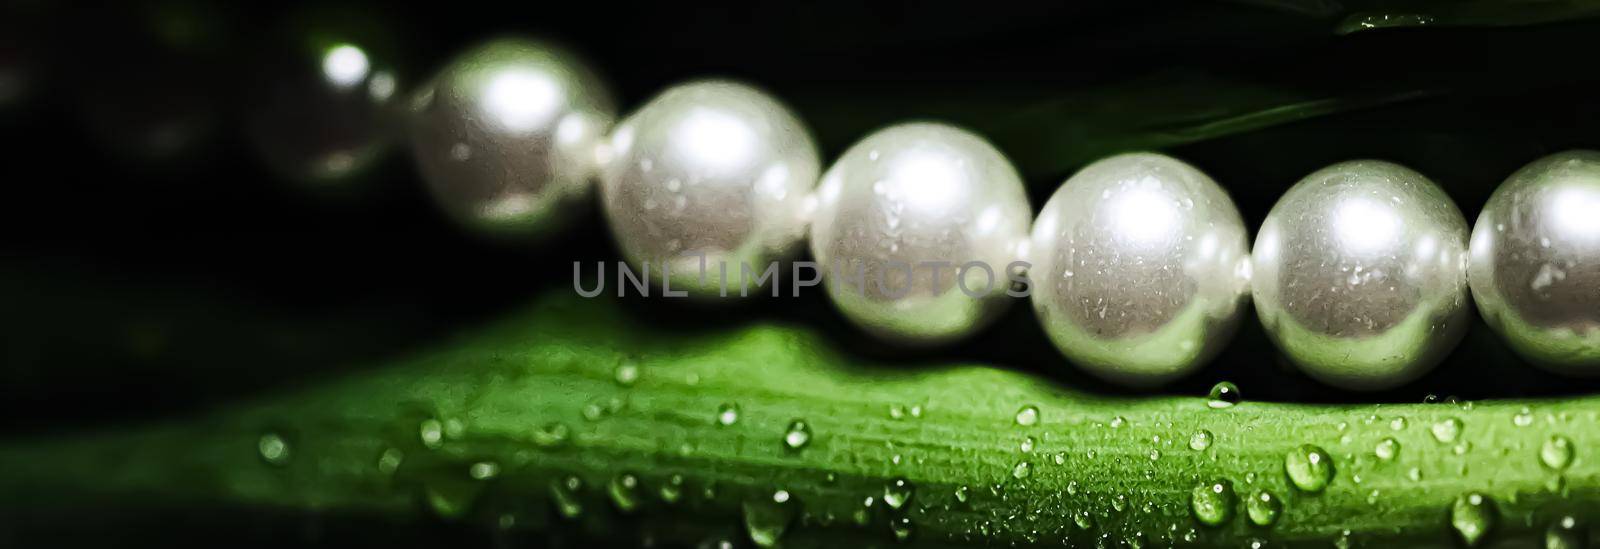 Pearls in exotic green leaves, luxury jewellery by Anneleven